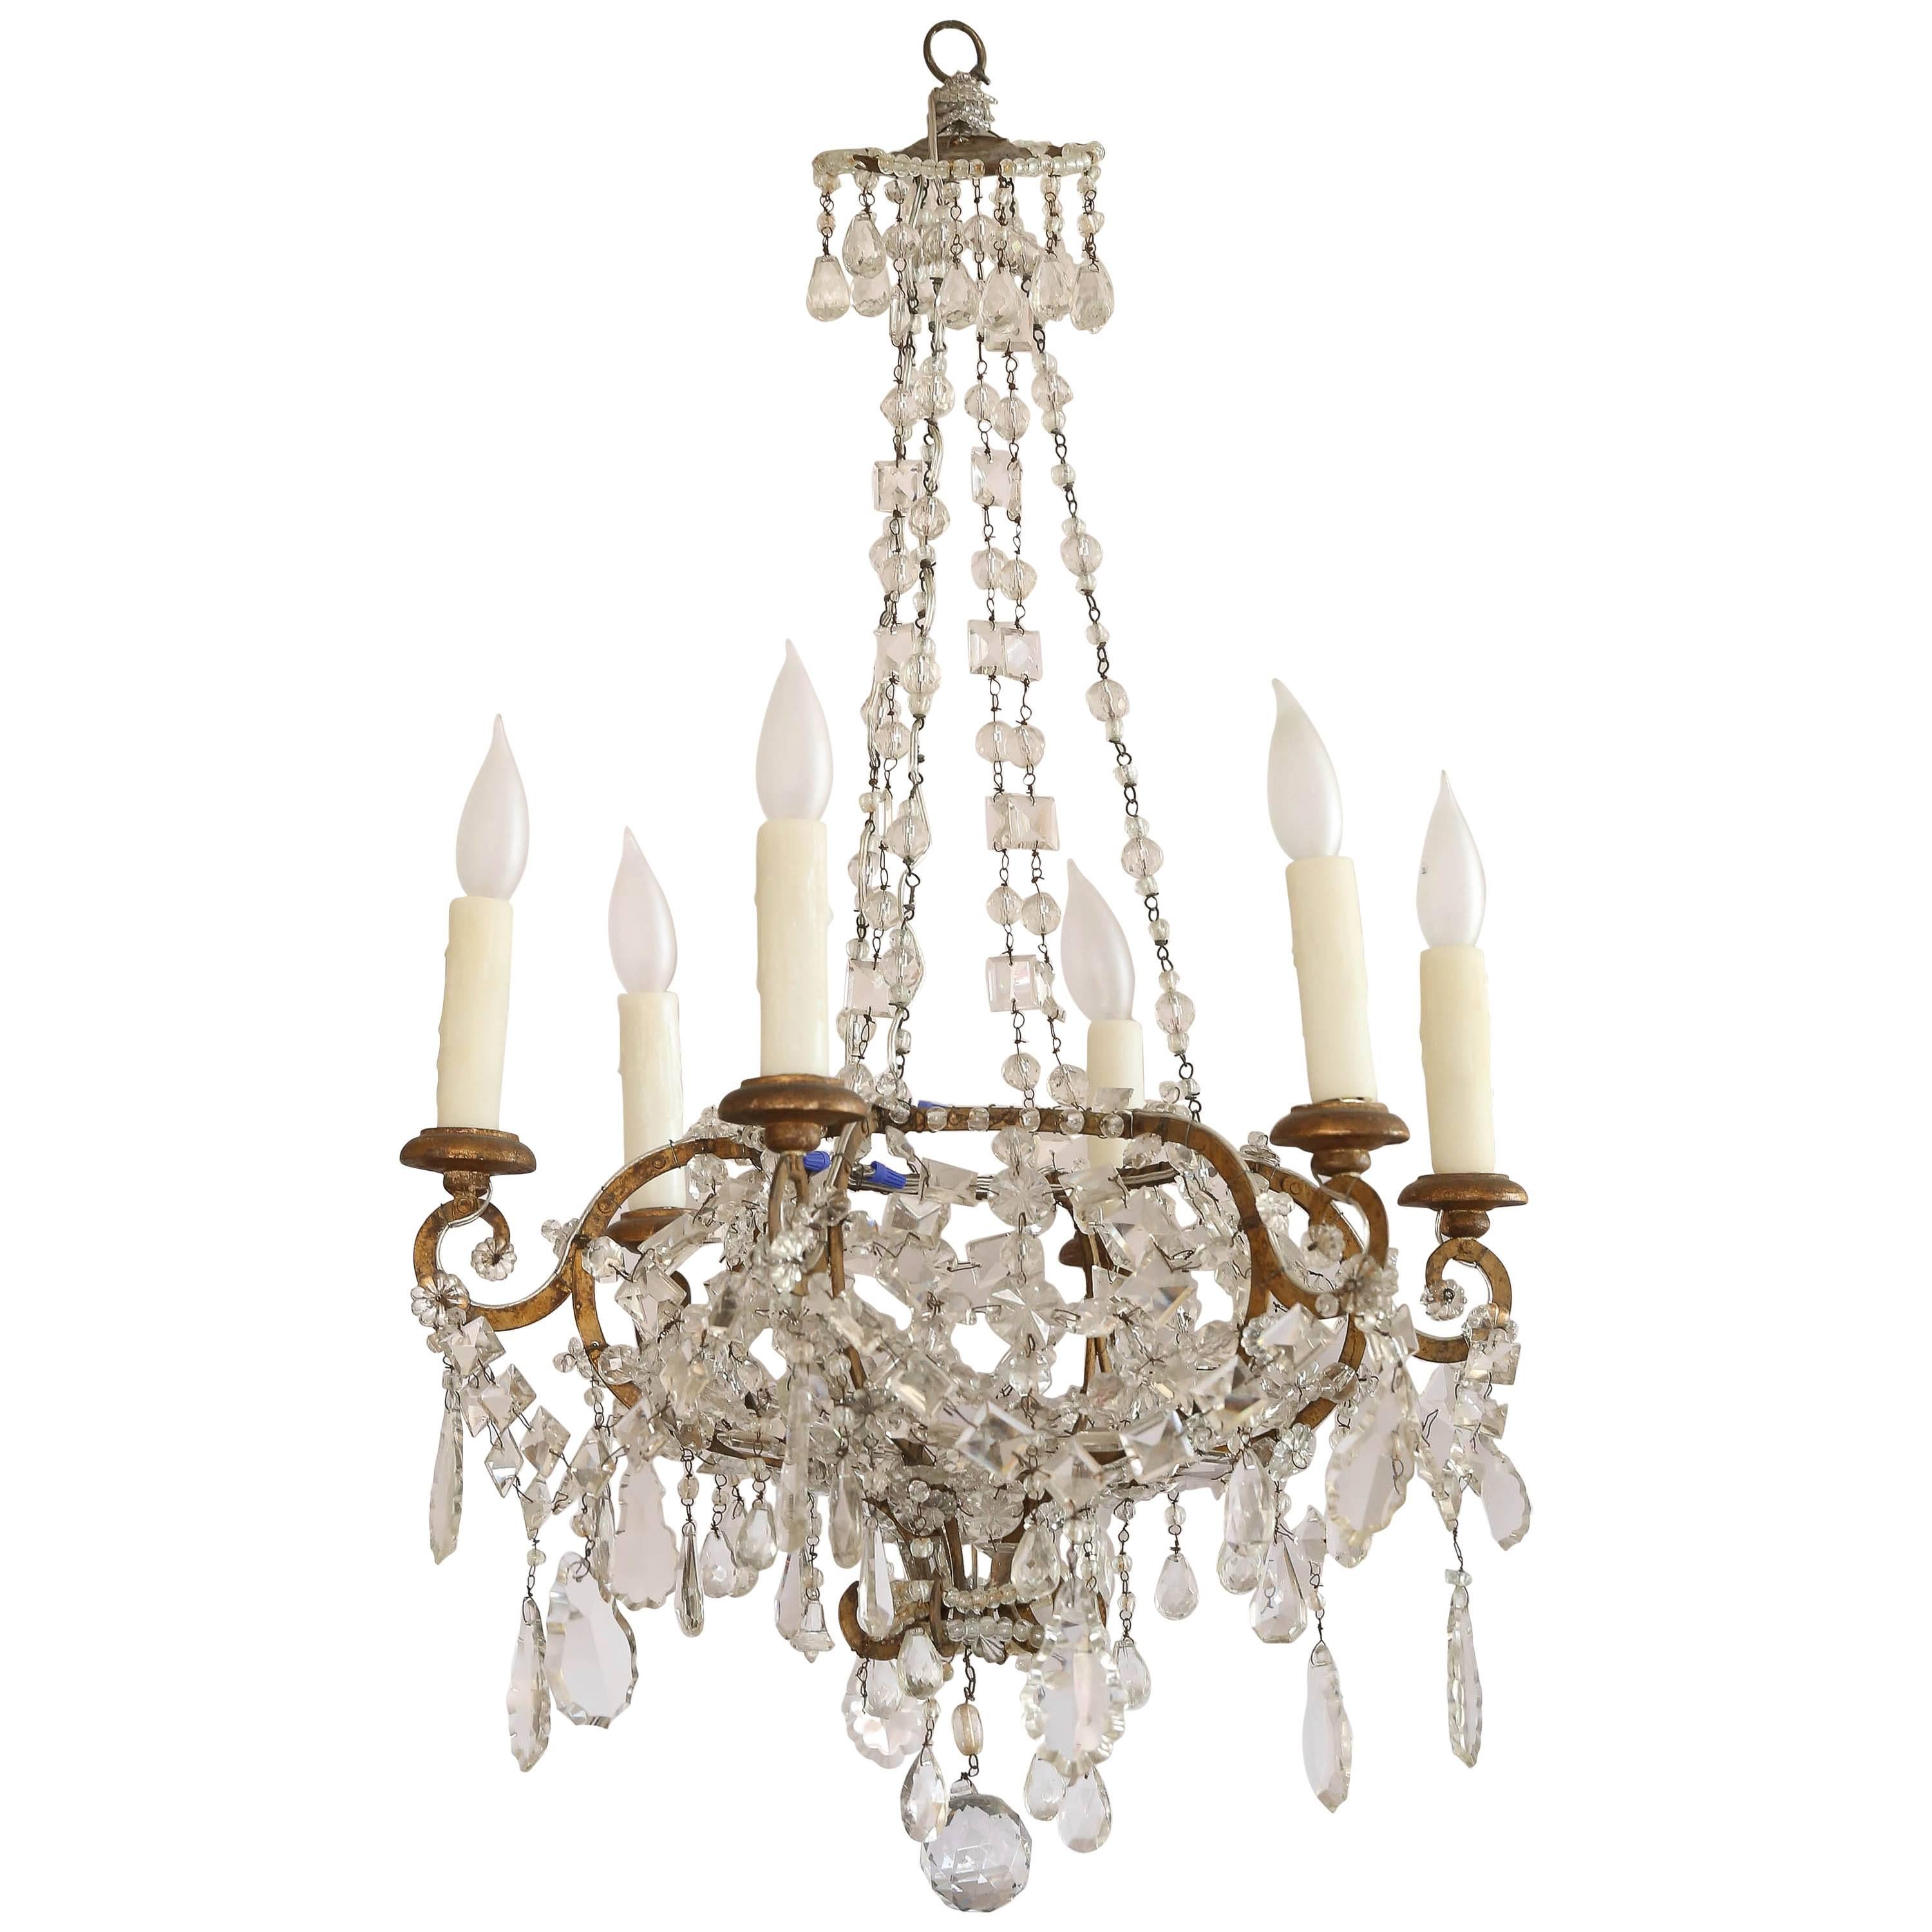 Italian Early 1900s Crystal Chandelier with Wood Gilt Candle Light Holders For Sale